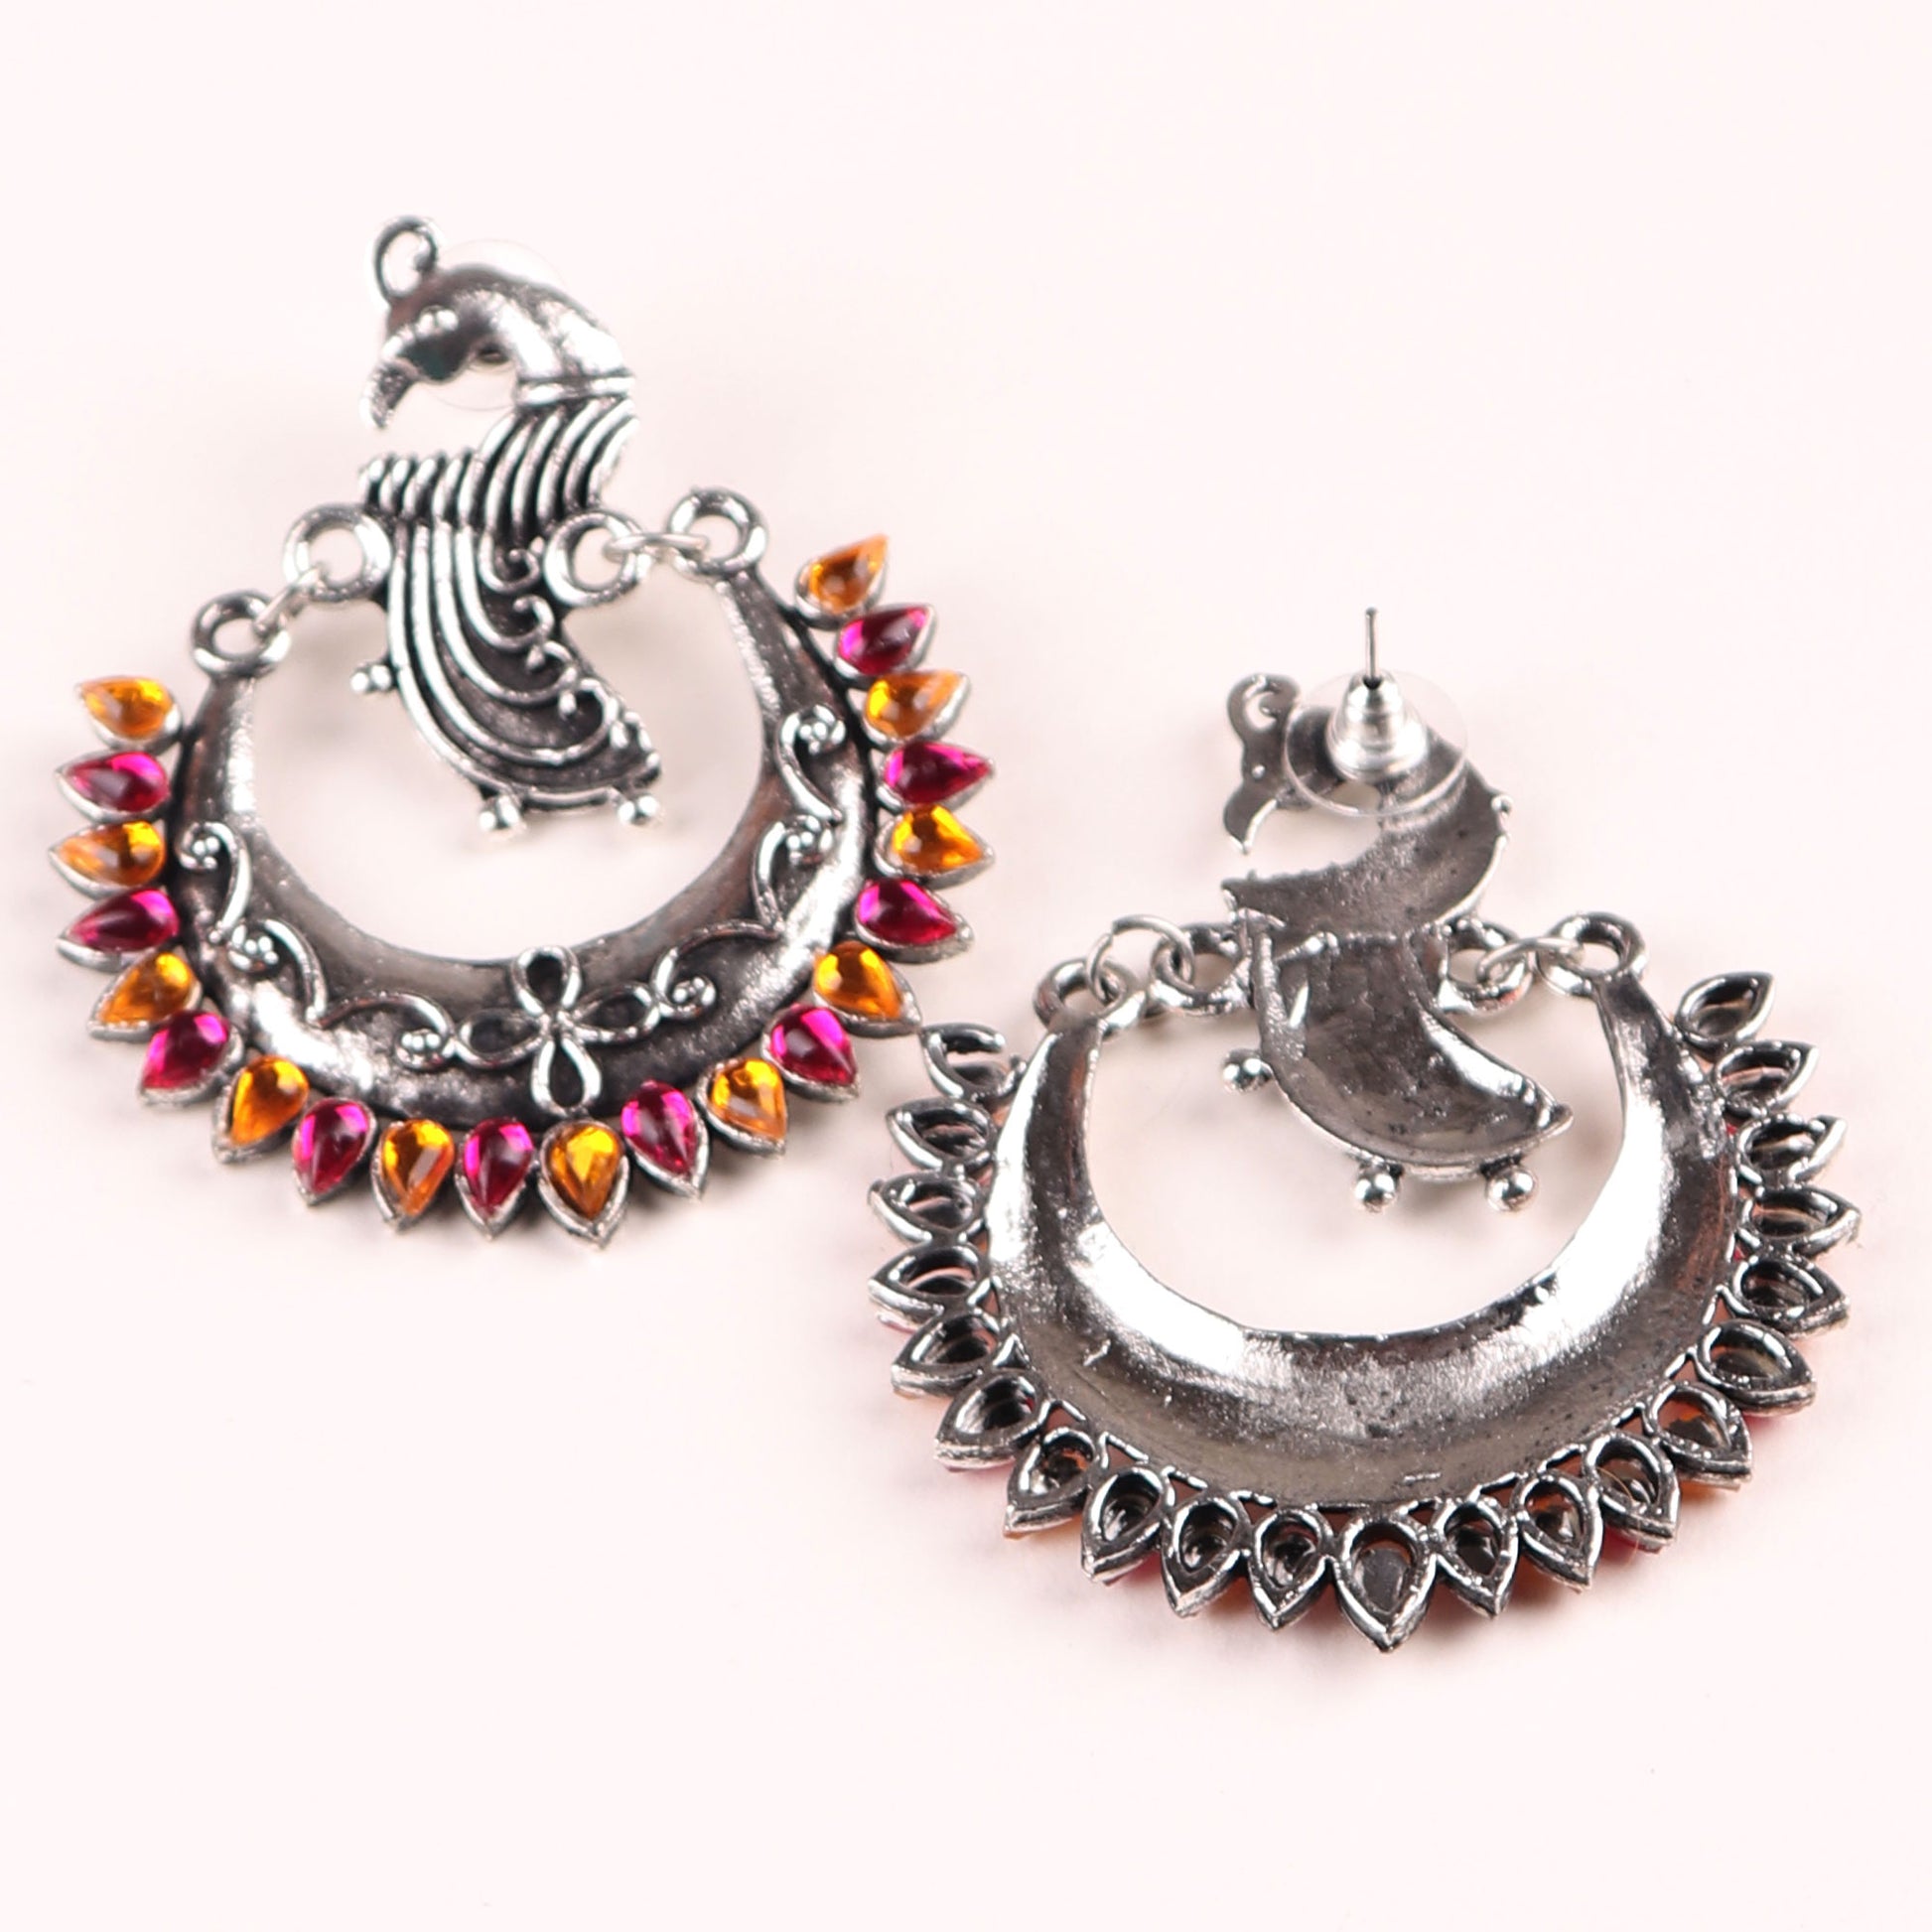 Earrings,The Peacock in the Moon in Pink & Orange - Cippele Multi Store